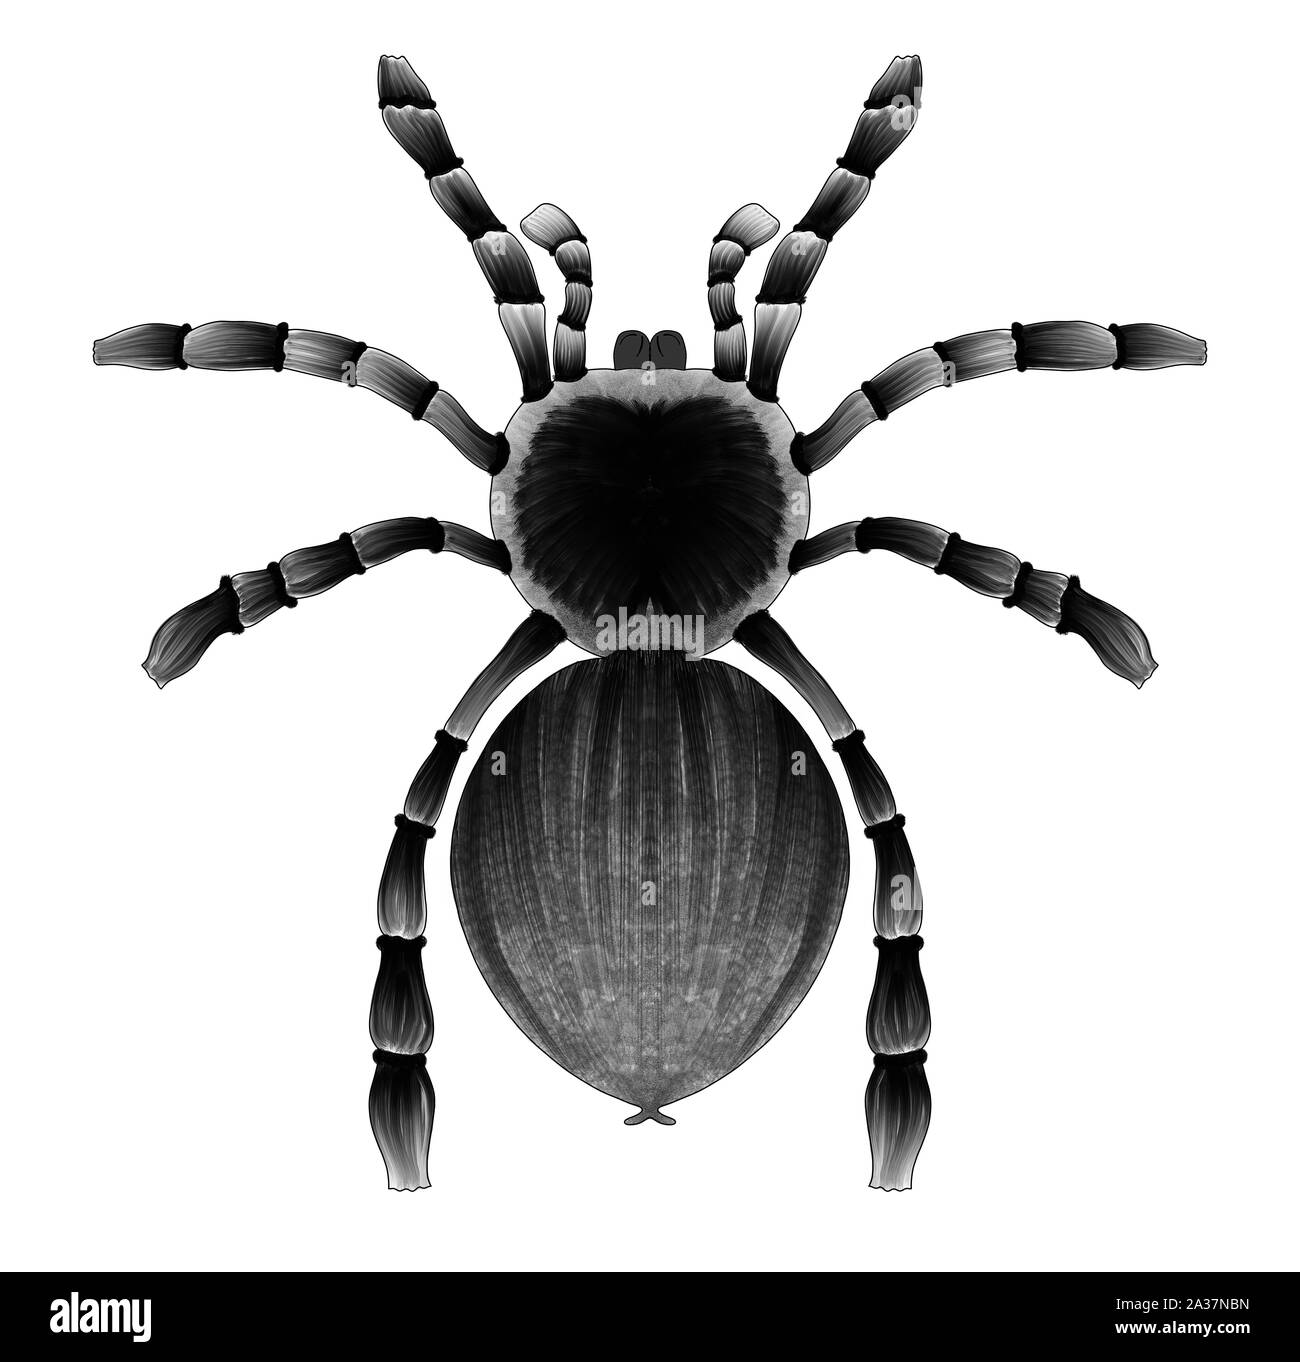 illustration of a black spider on a white background. Stock Photo